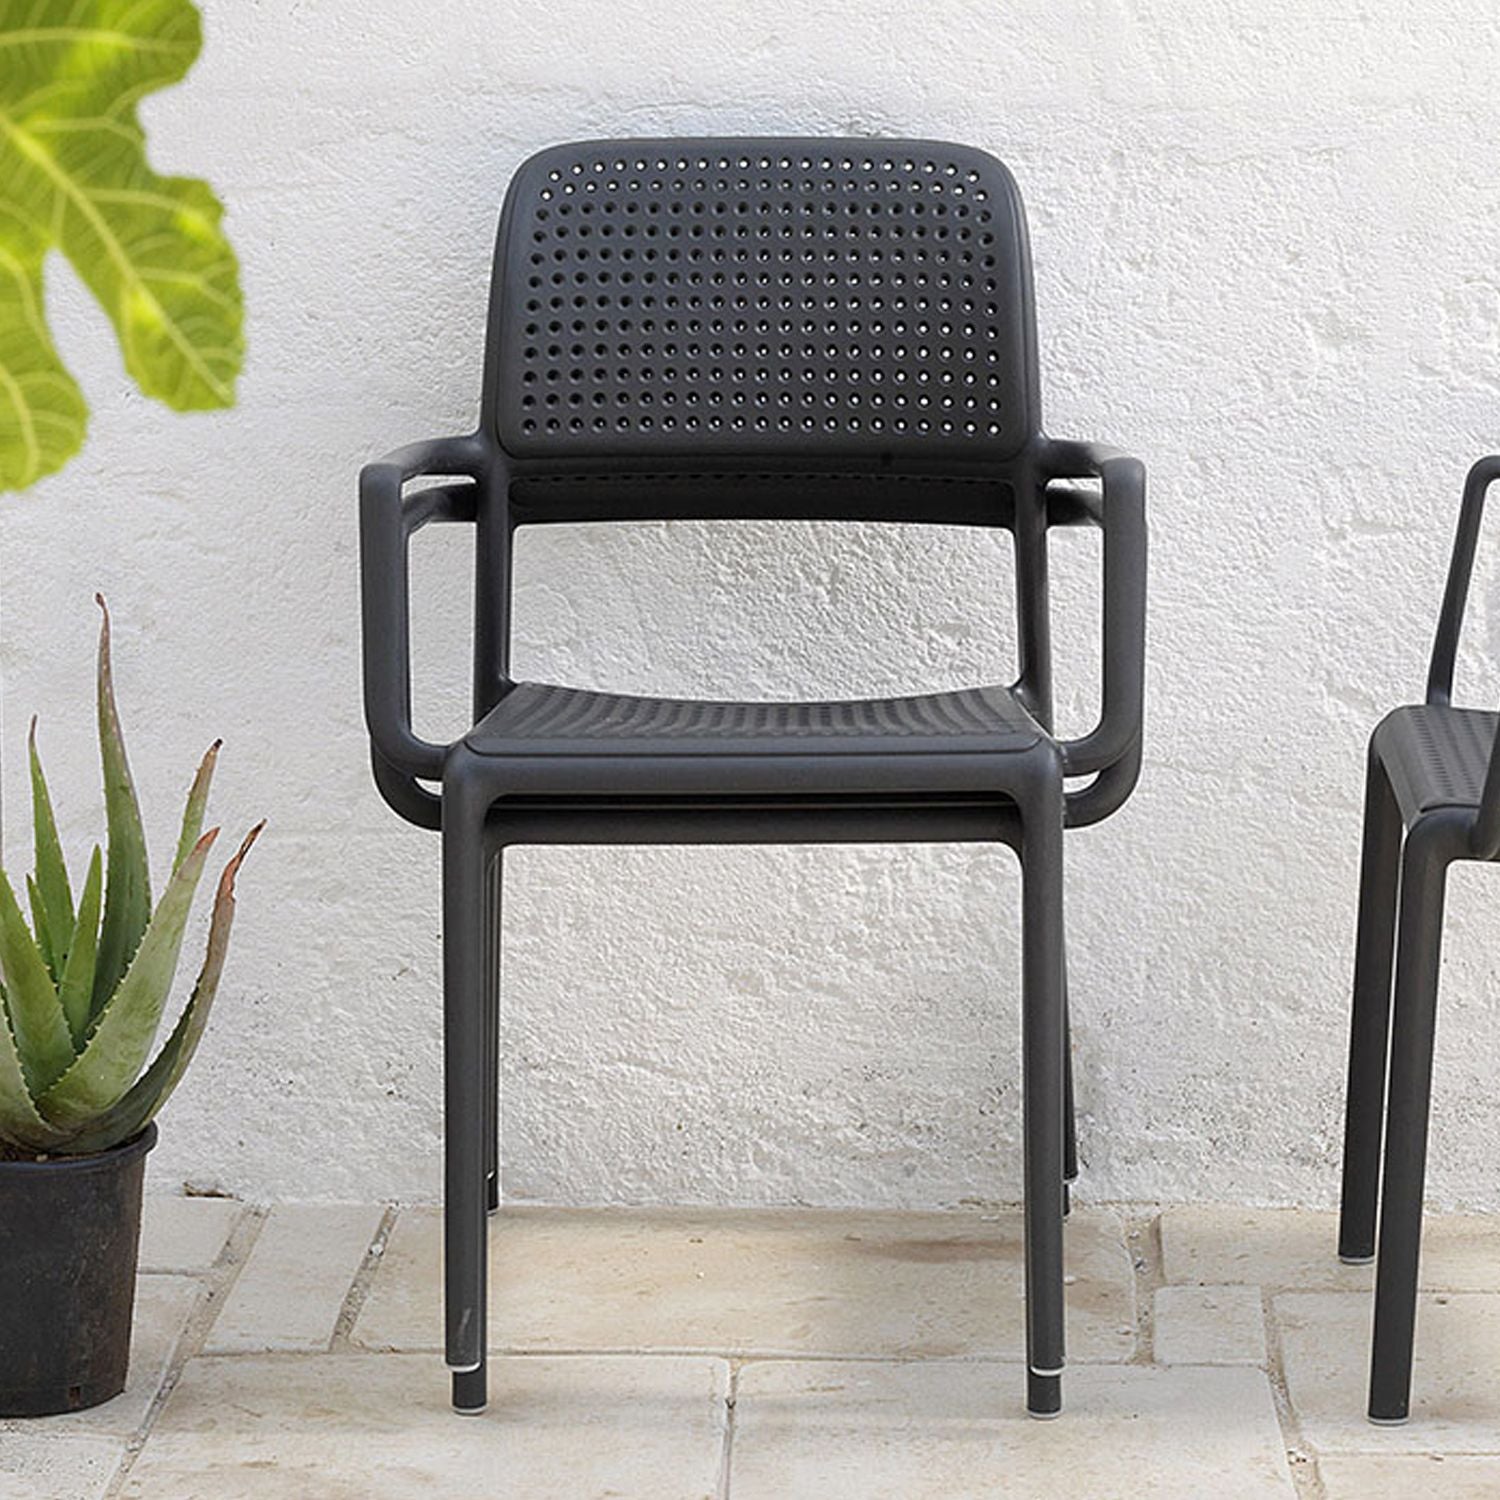 Nardi Garden Chairs Now Online - Shop Now At BF Home